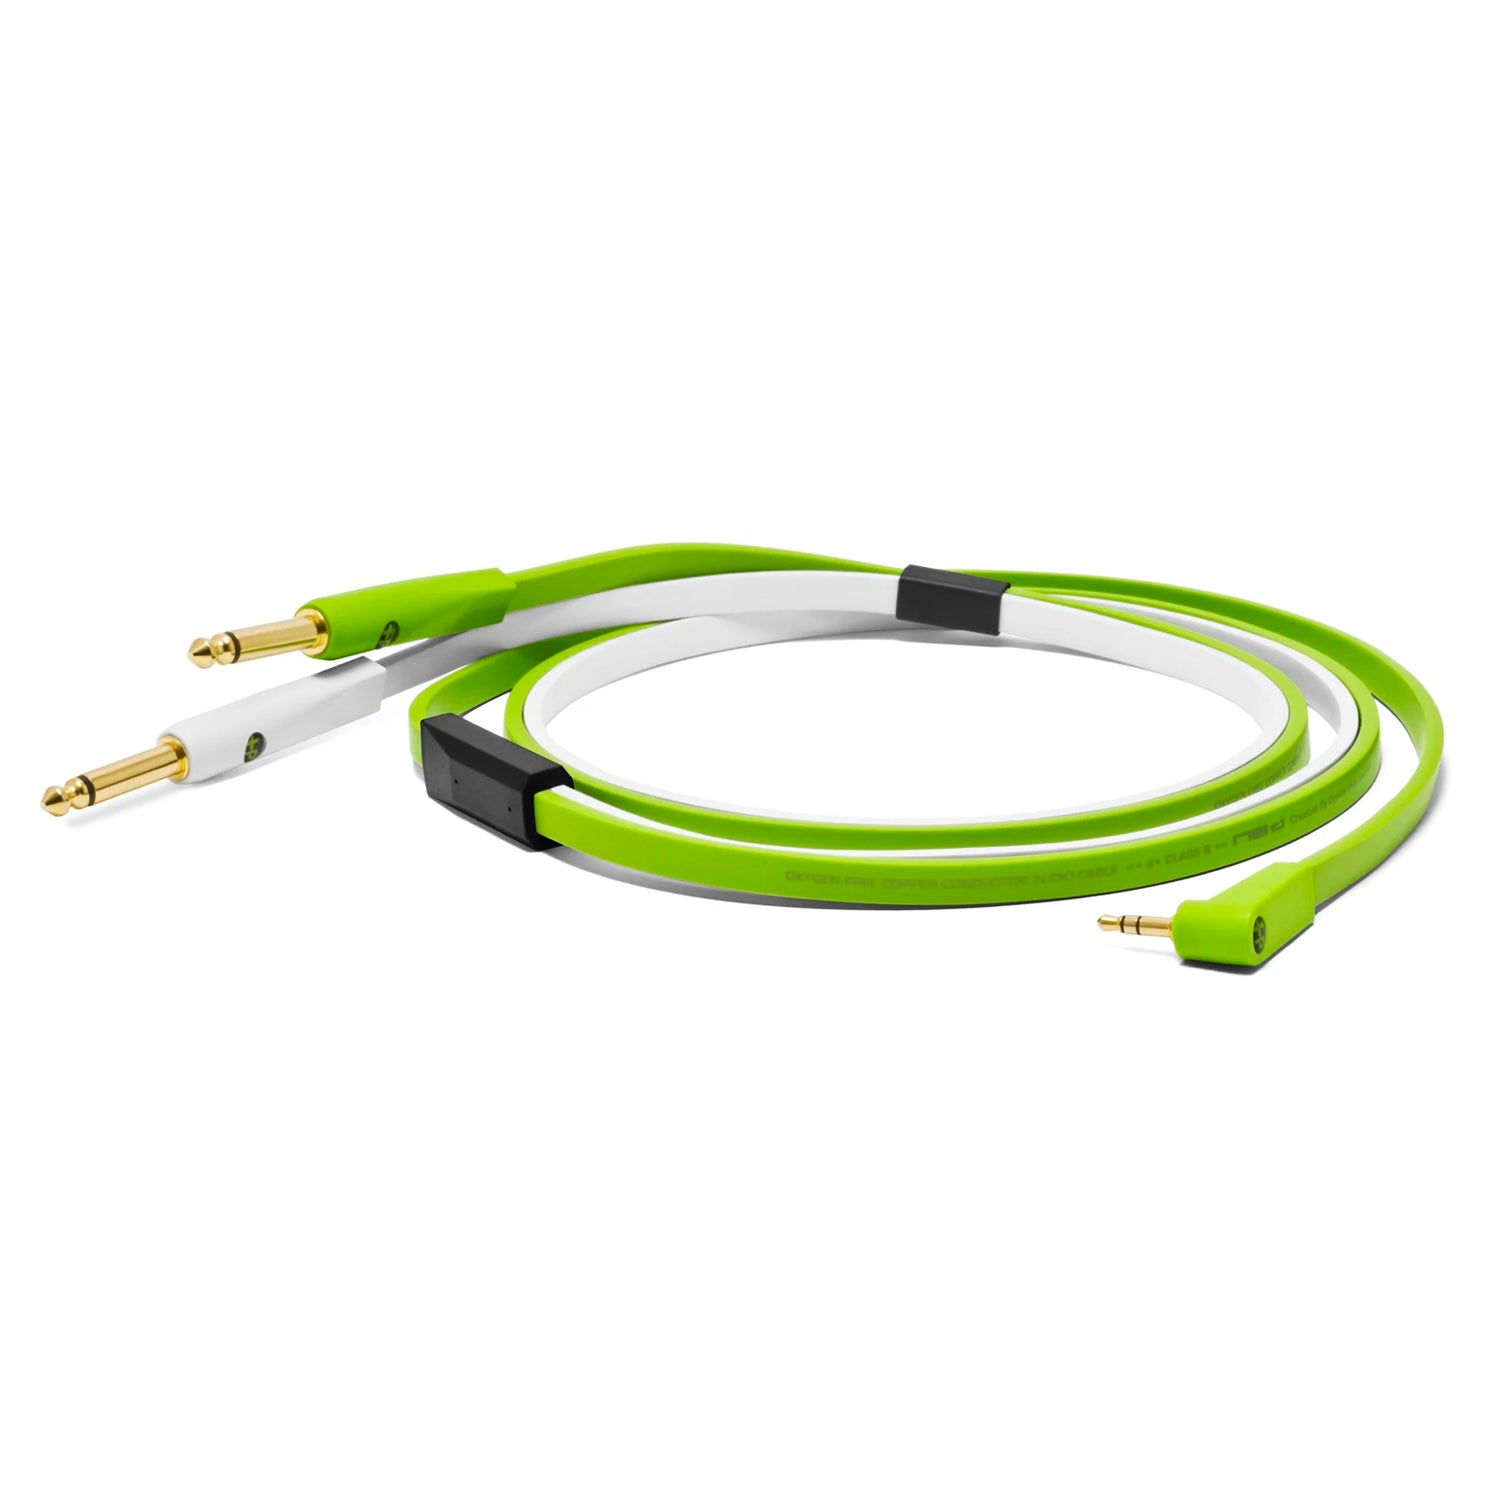 Oyaide NEO d+ Class B MYTS Cable